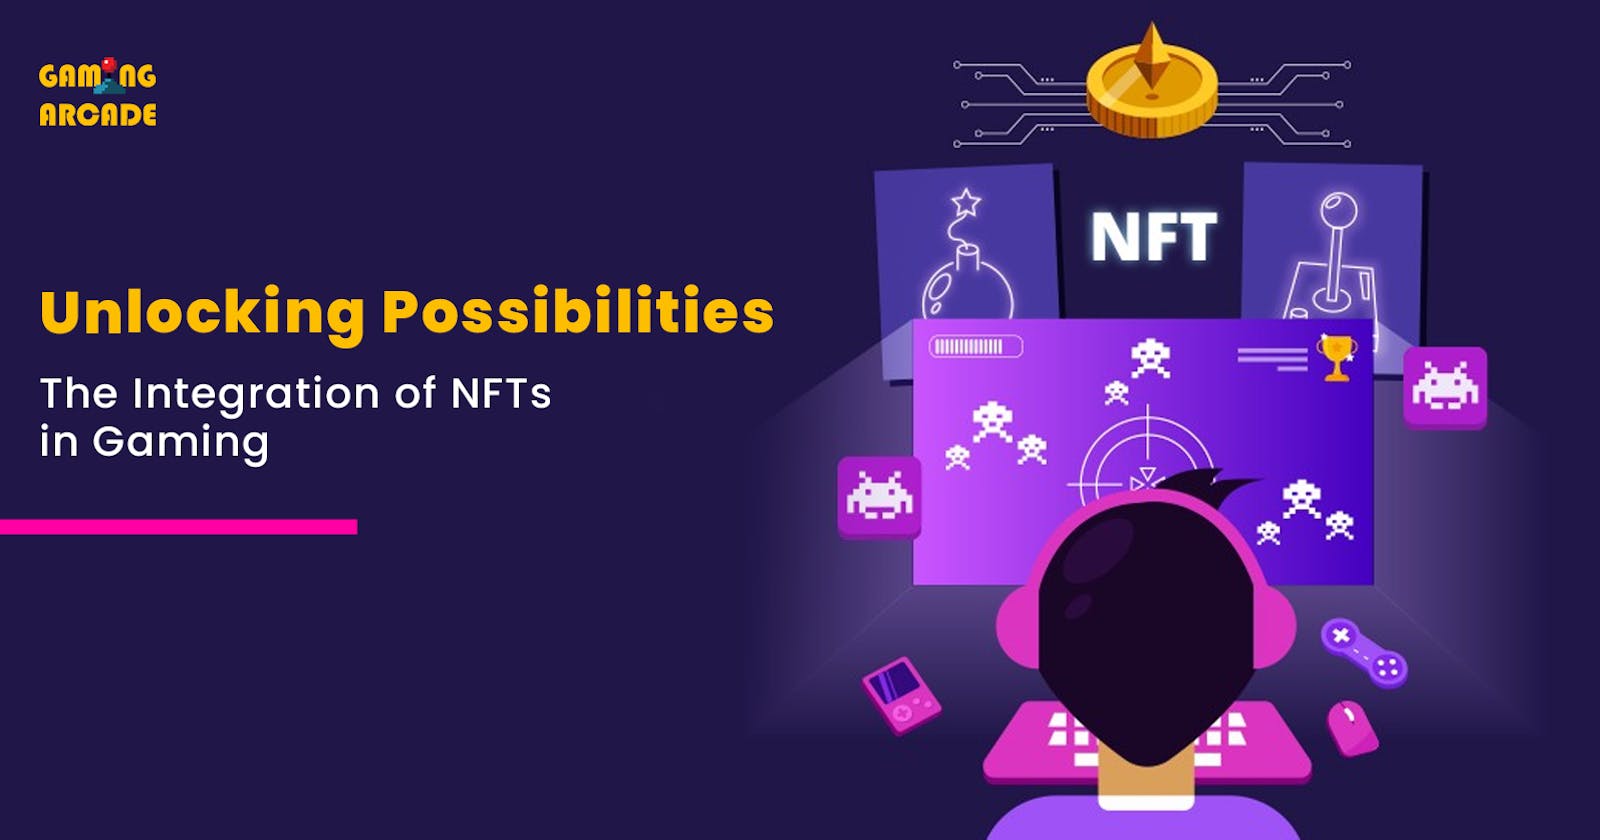 Unlocking Possibilities: The Integration of NFTs in Gaming